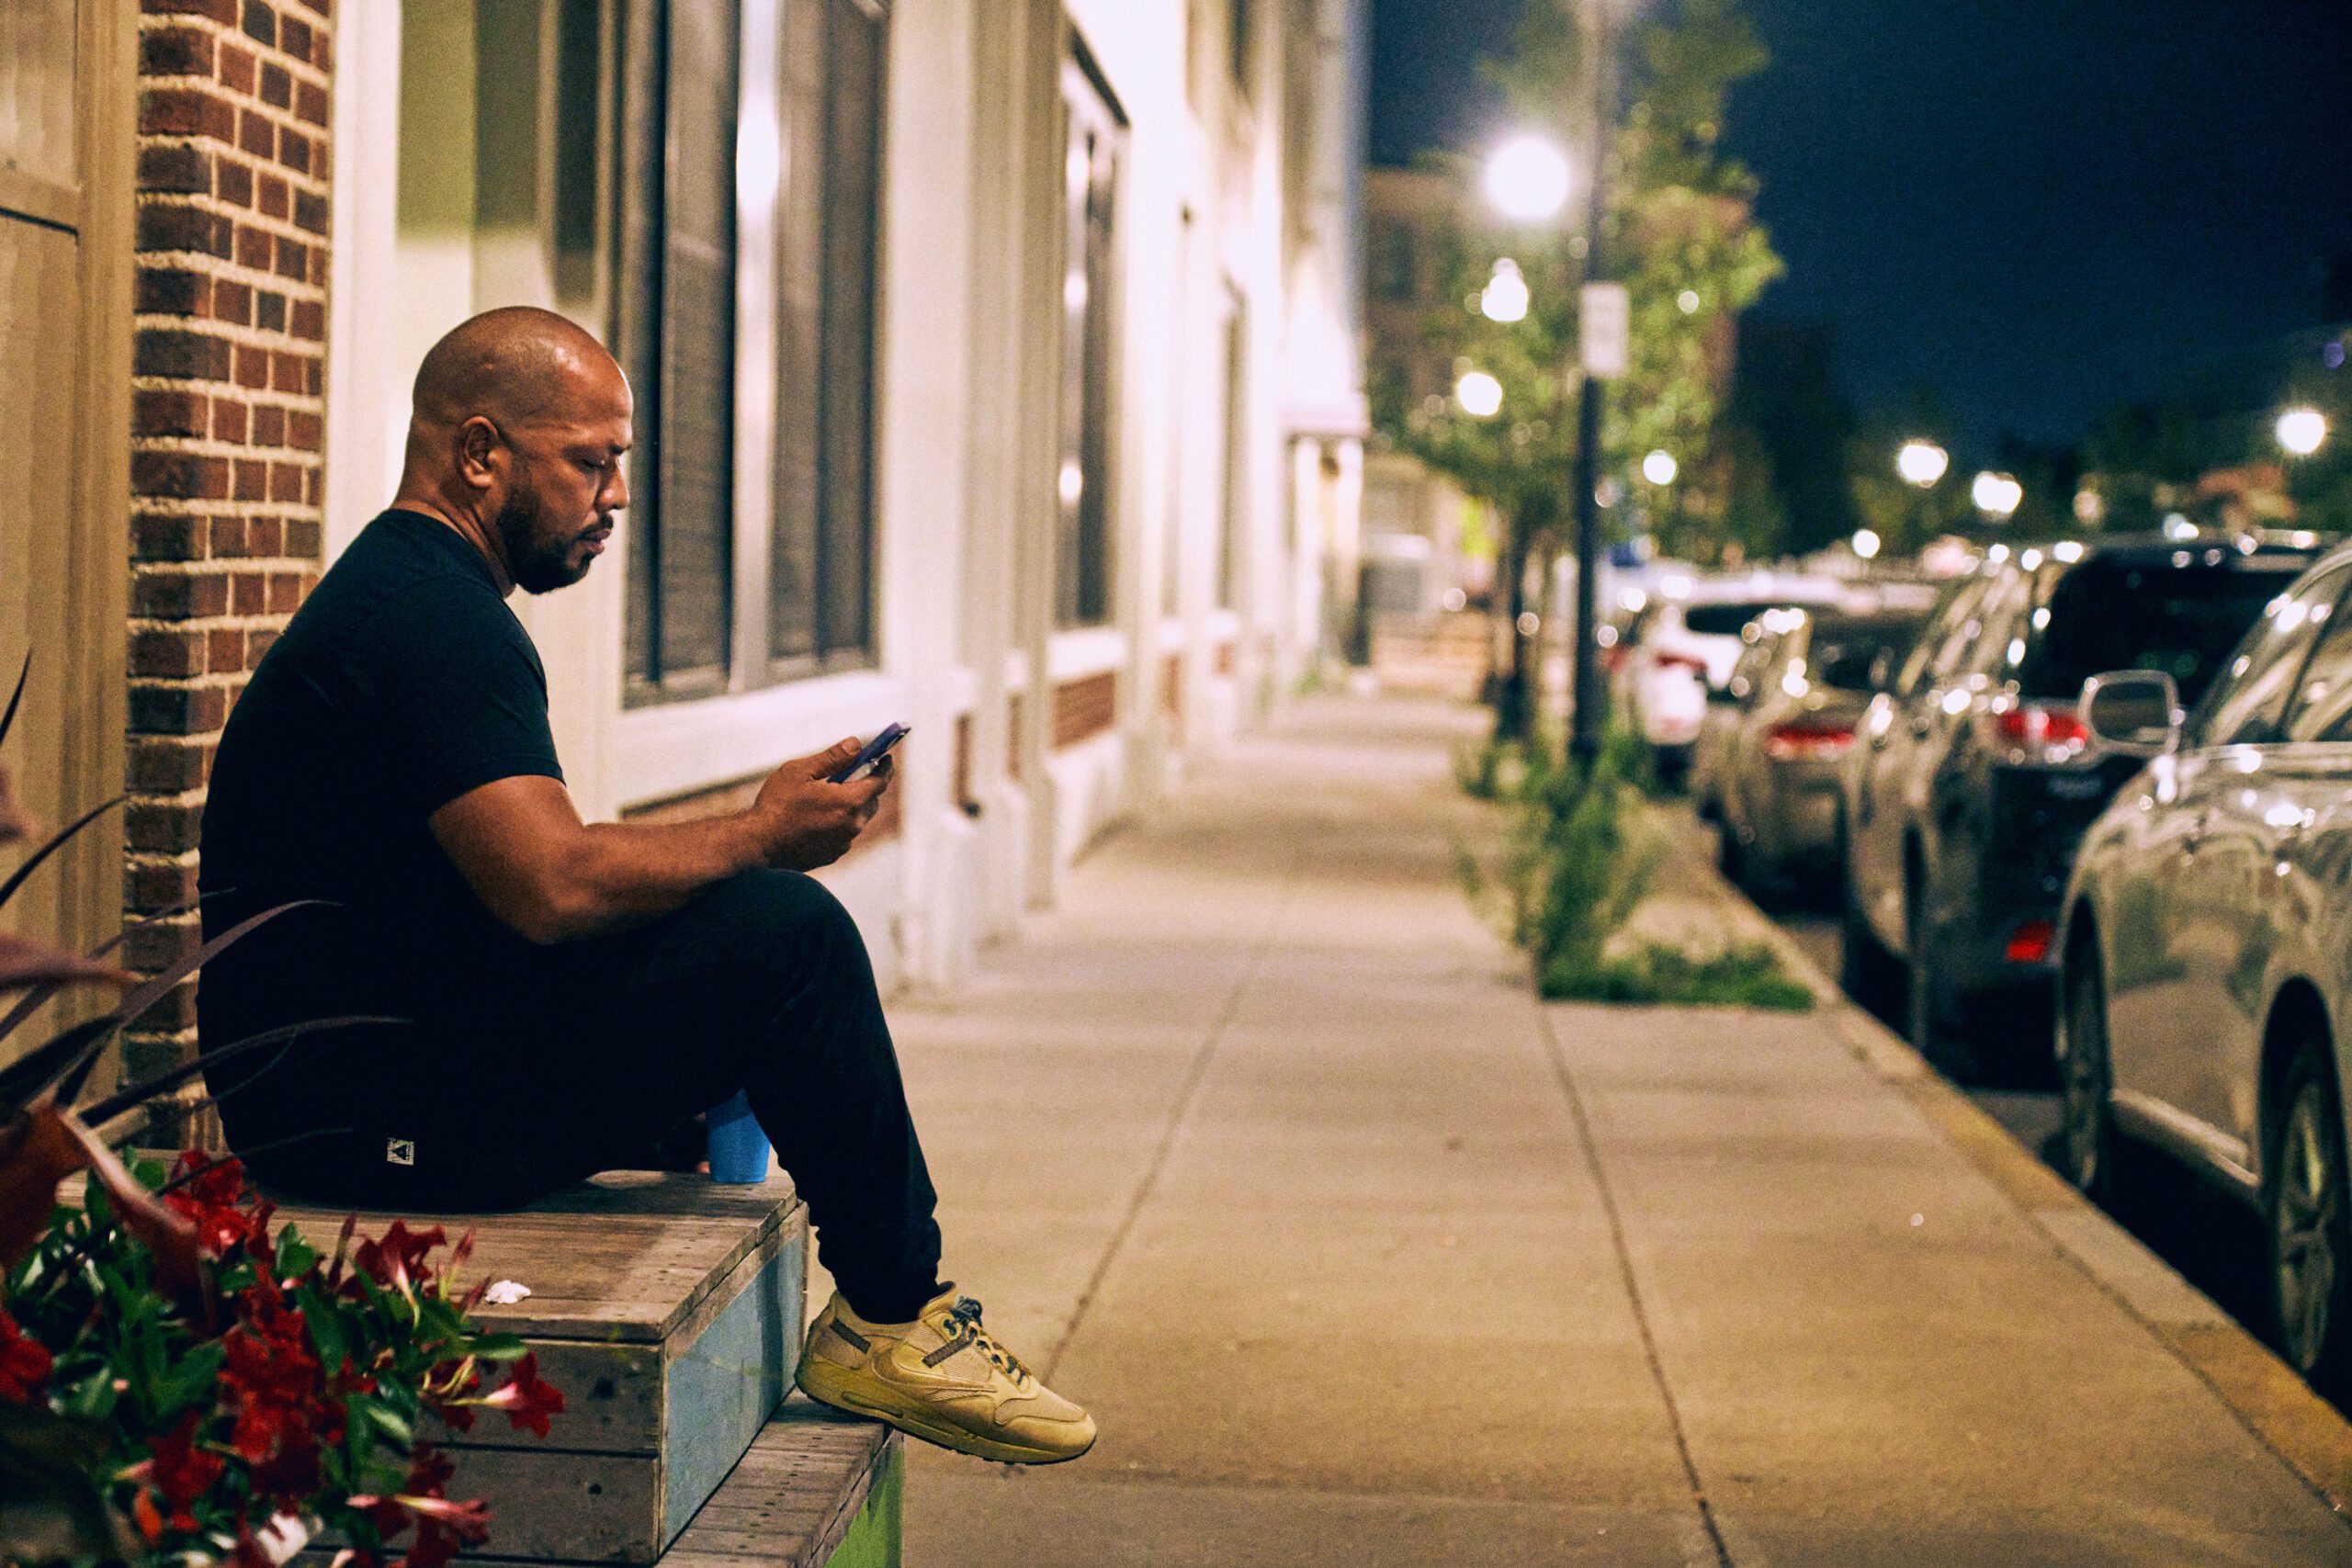 A man sitting on a sidewalk looking at his phone.